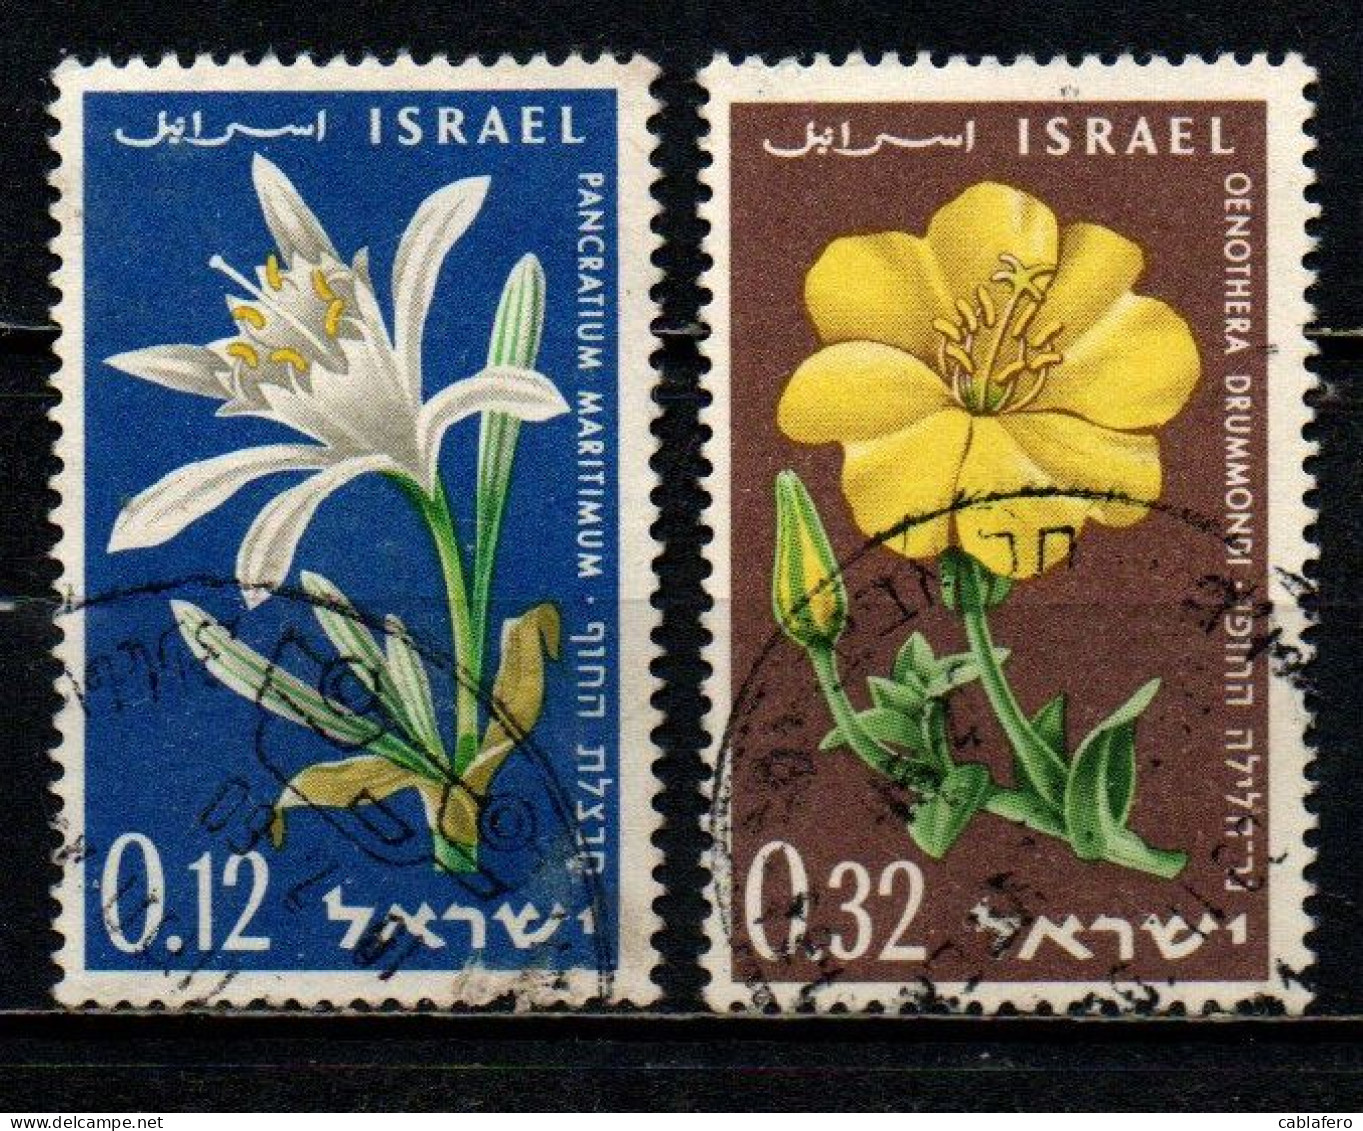 ISRAELE - 1960 - Sand Lily And Evening Primrose - Memorial Day; Proclamation Of State Of Israel, 12th Anniv - USATI - Gebraucht (ohne Tabs)